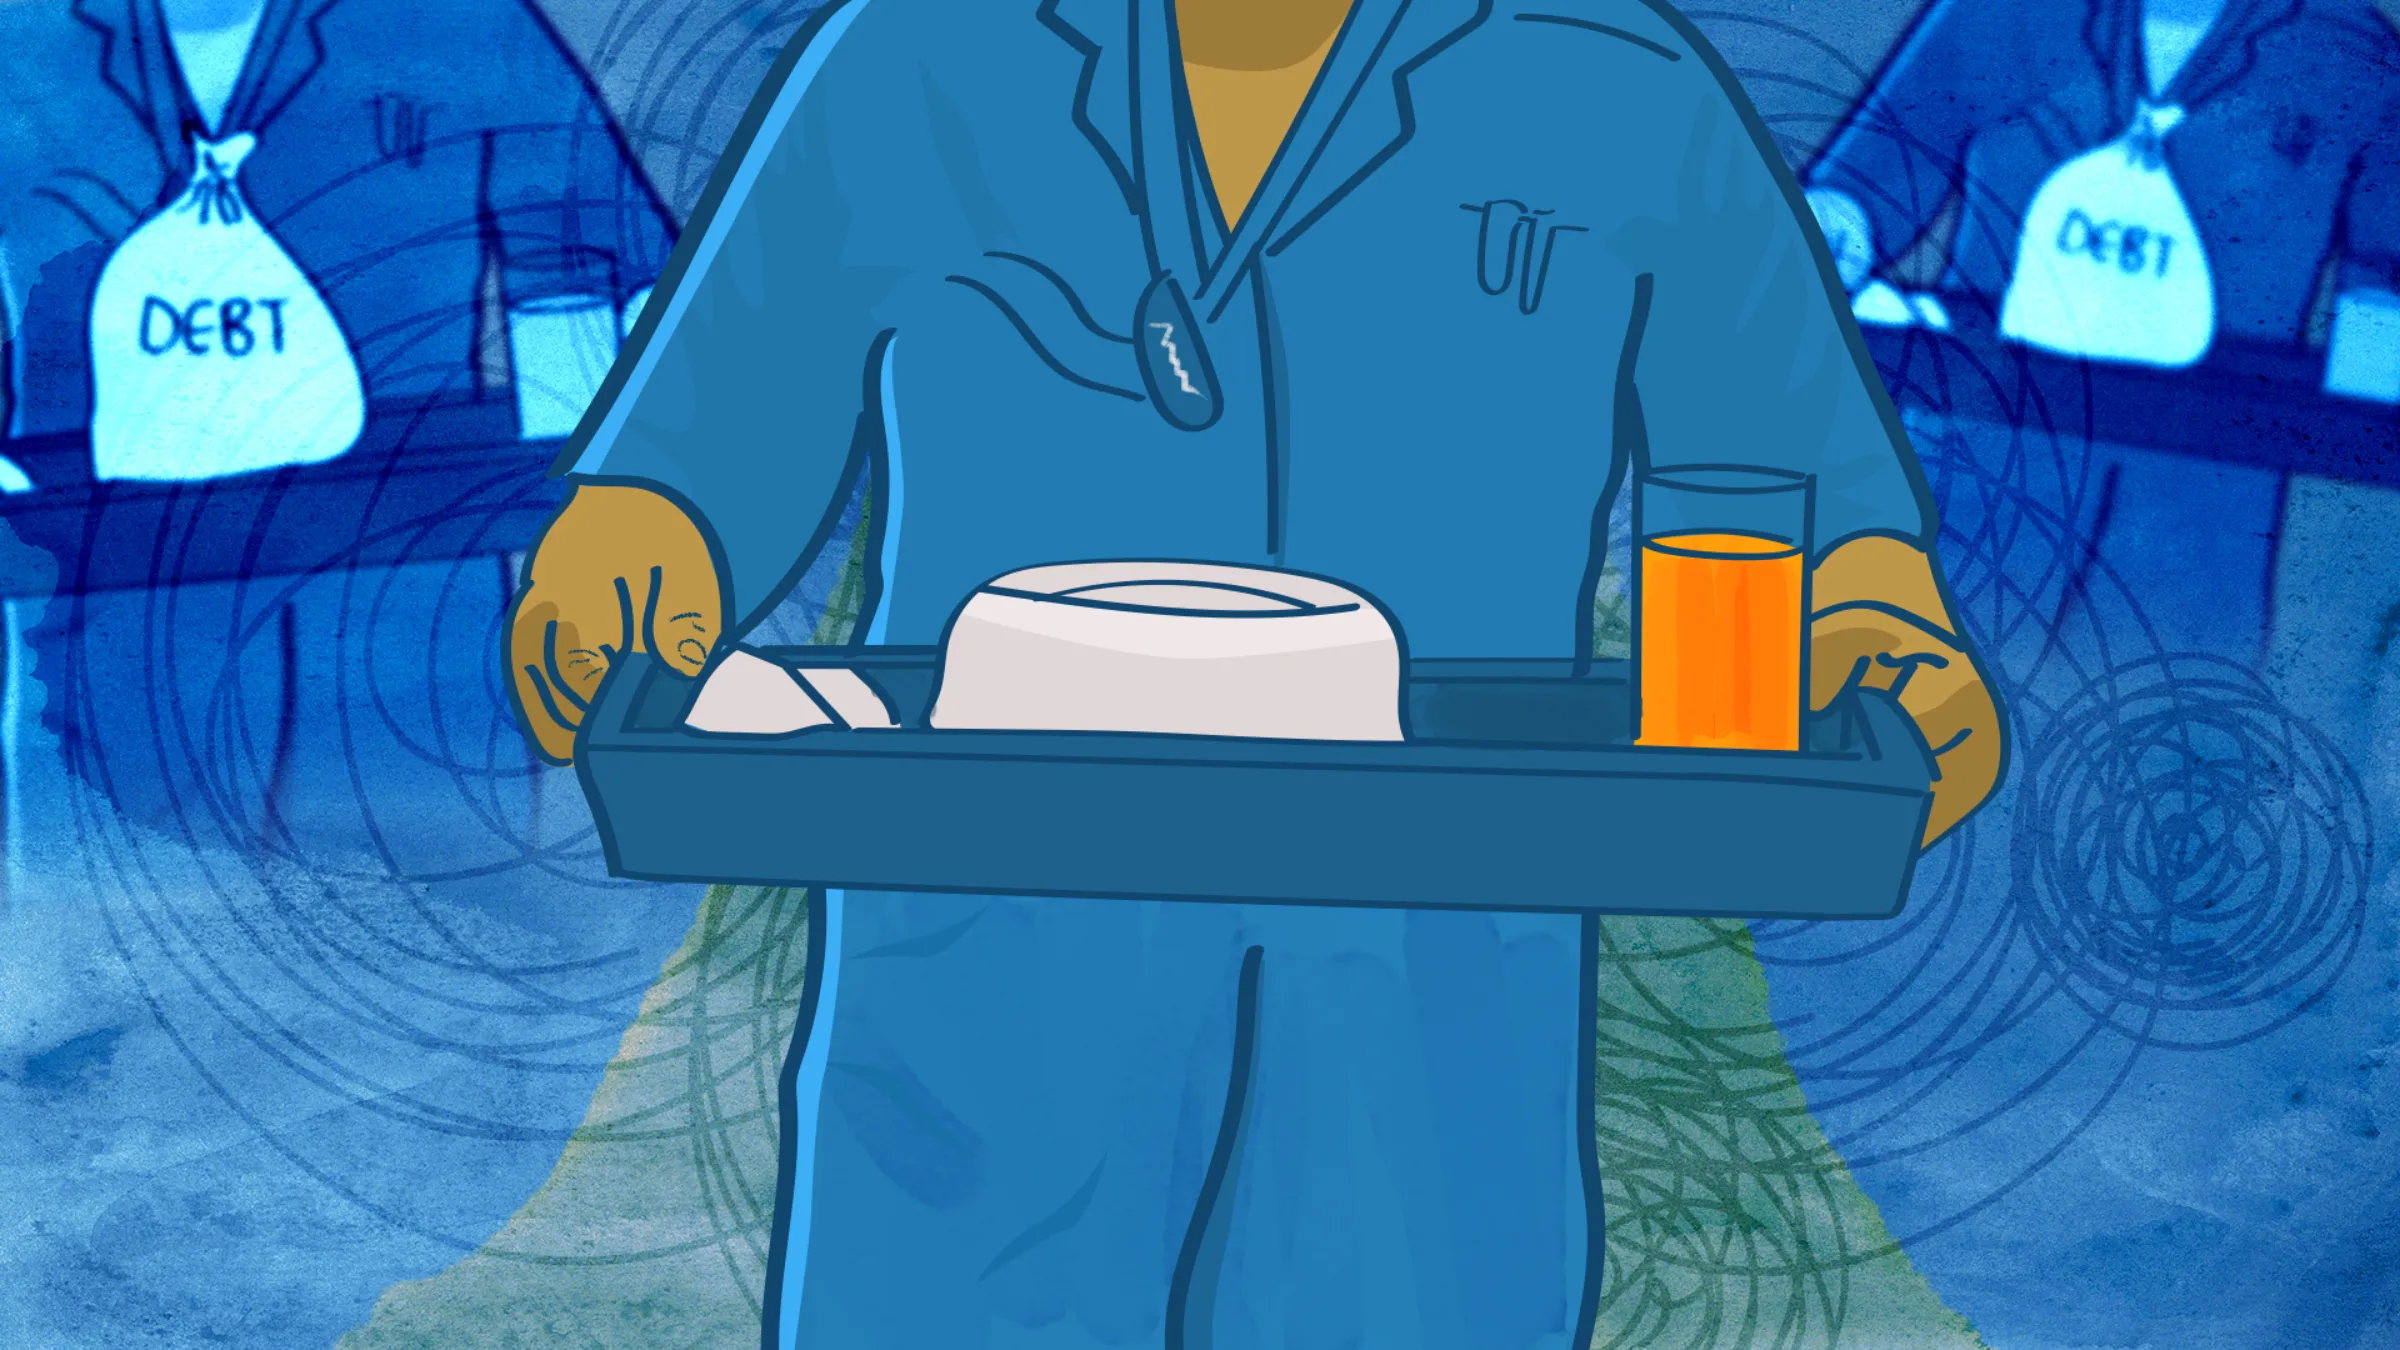 An illustration showing a tray of food being carried by a carer, with similar trays in the background holding bags labelled 'debt'.